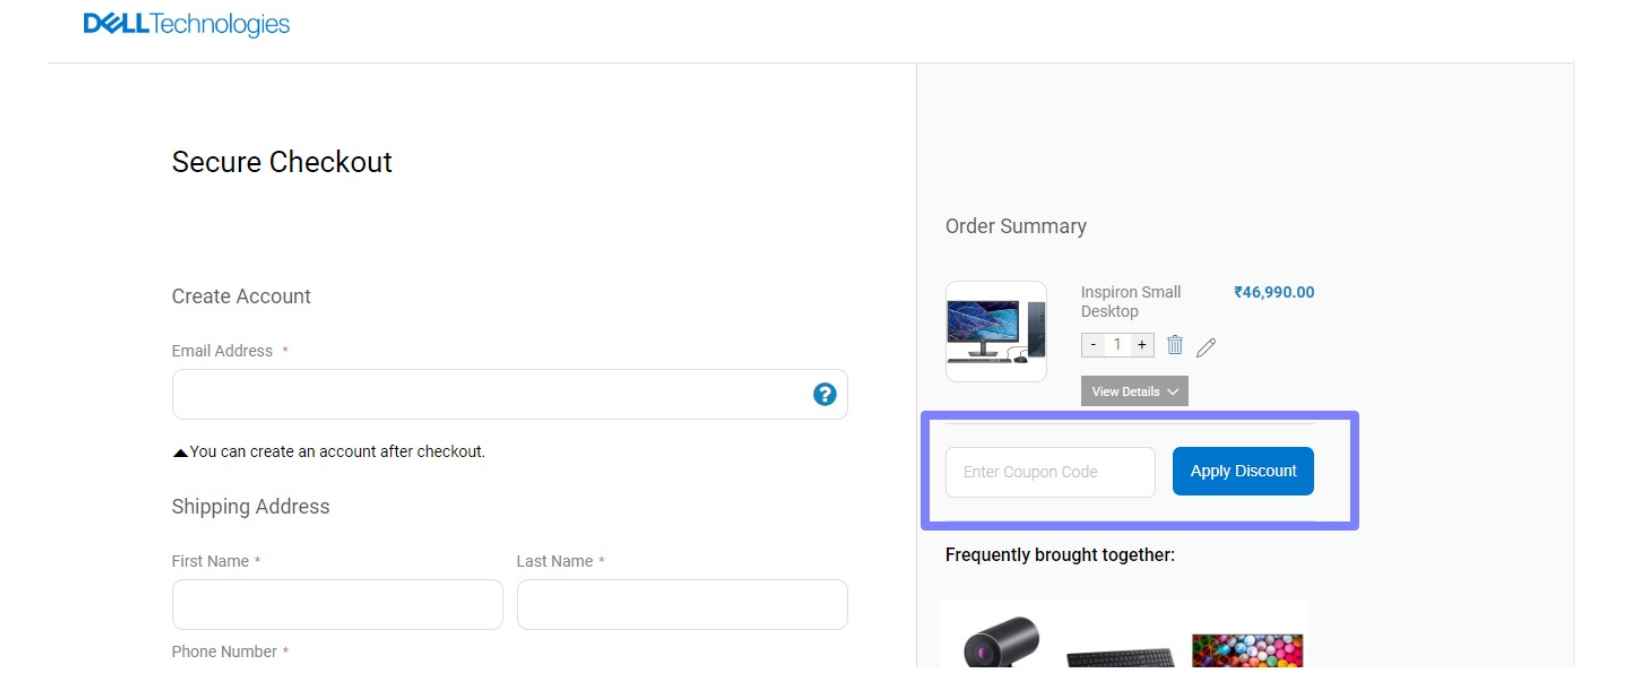 How to Use Dell Coupon Code